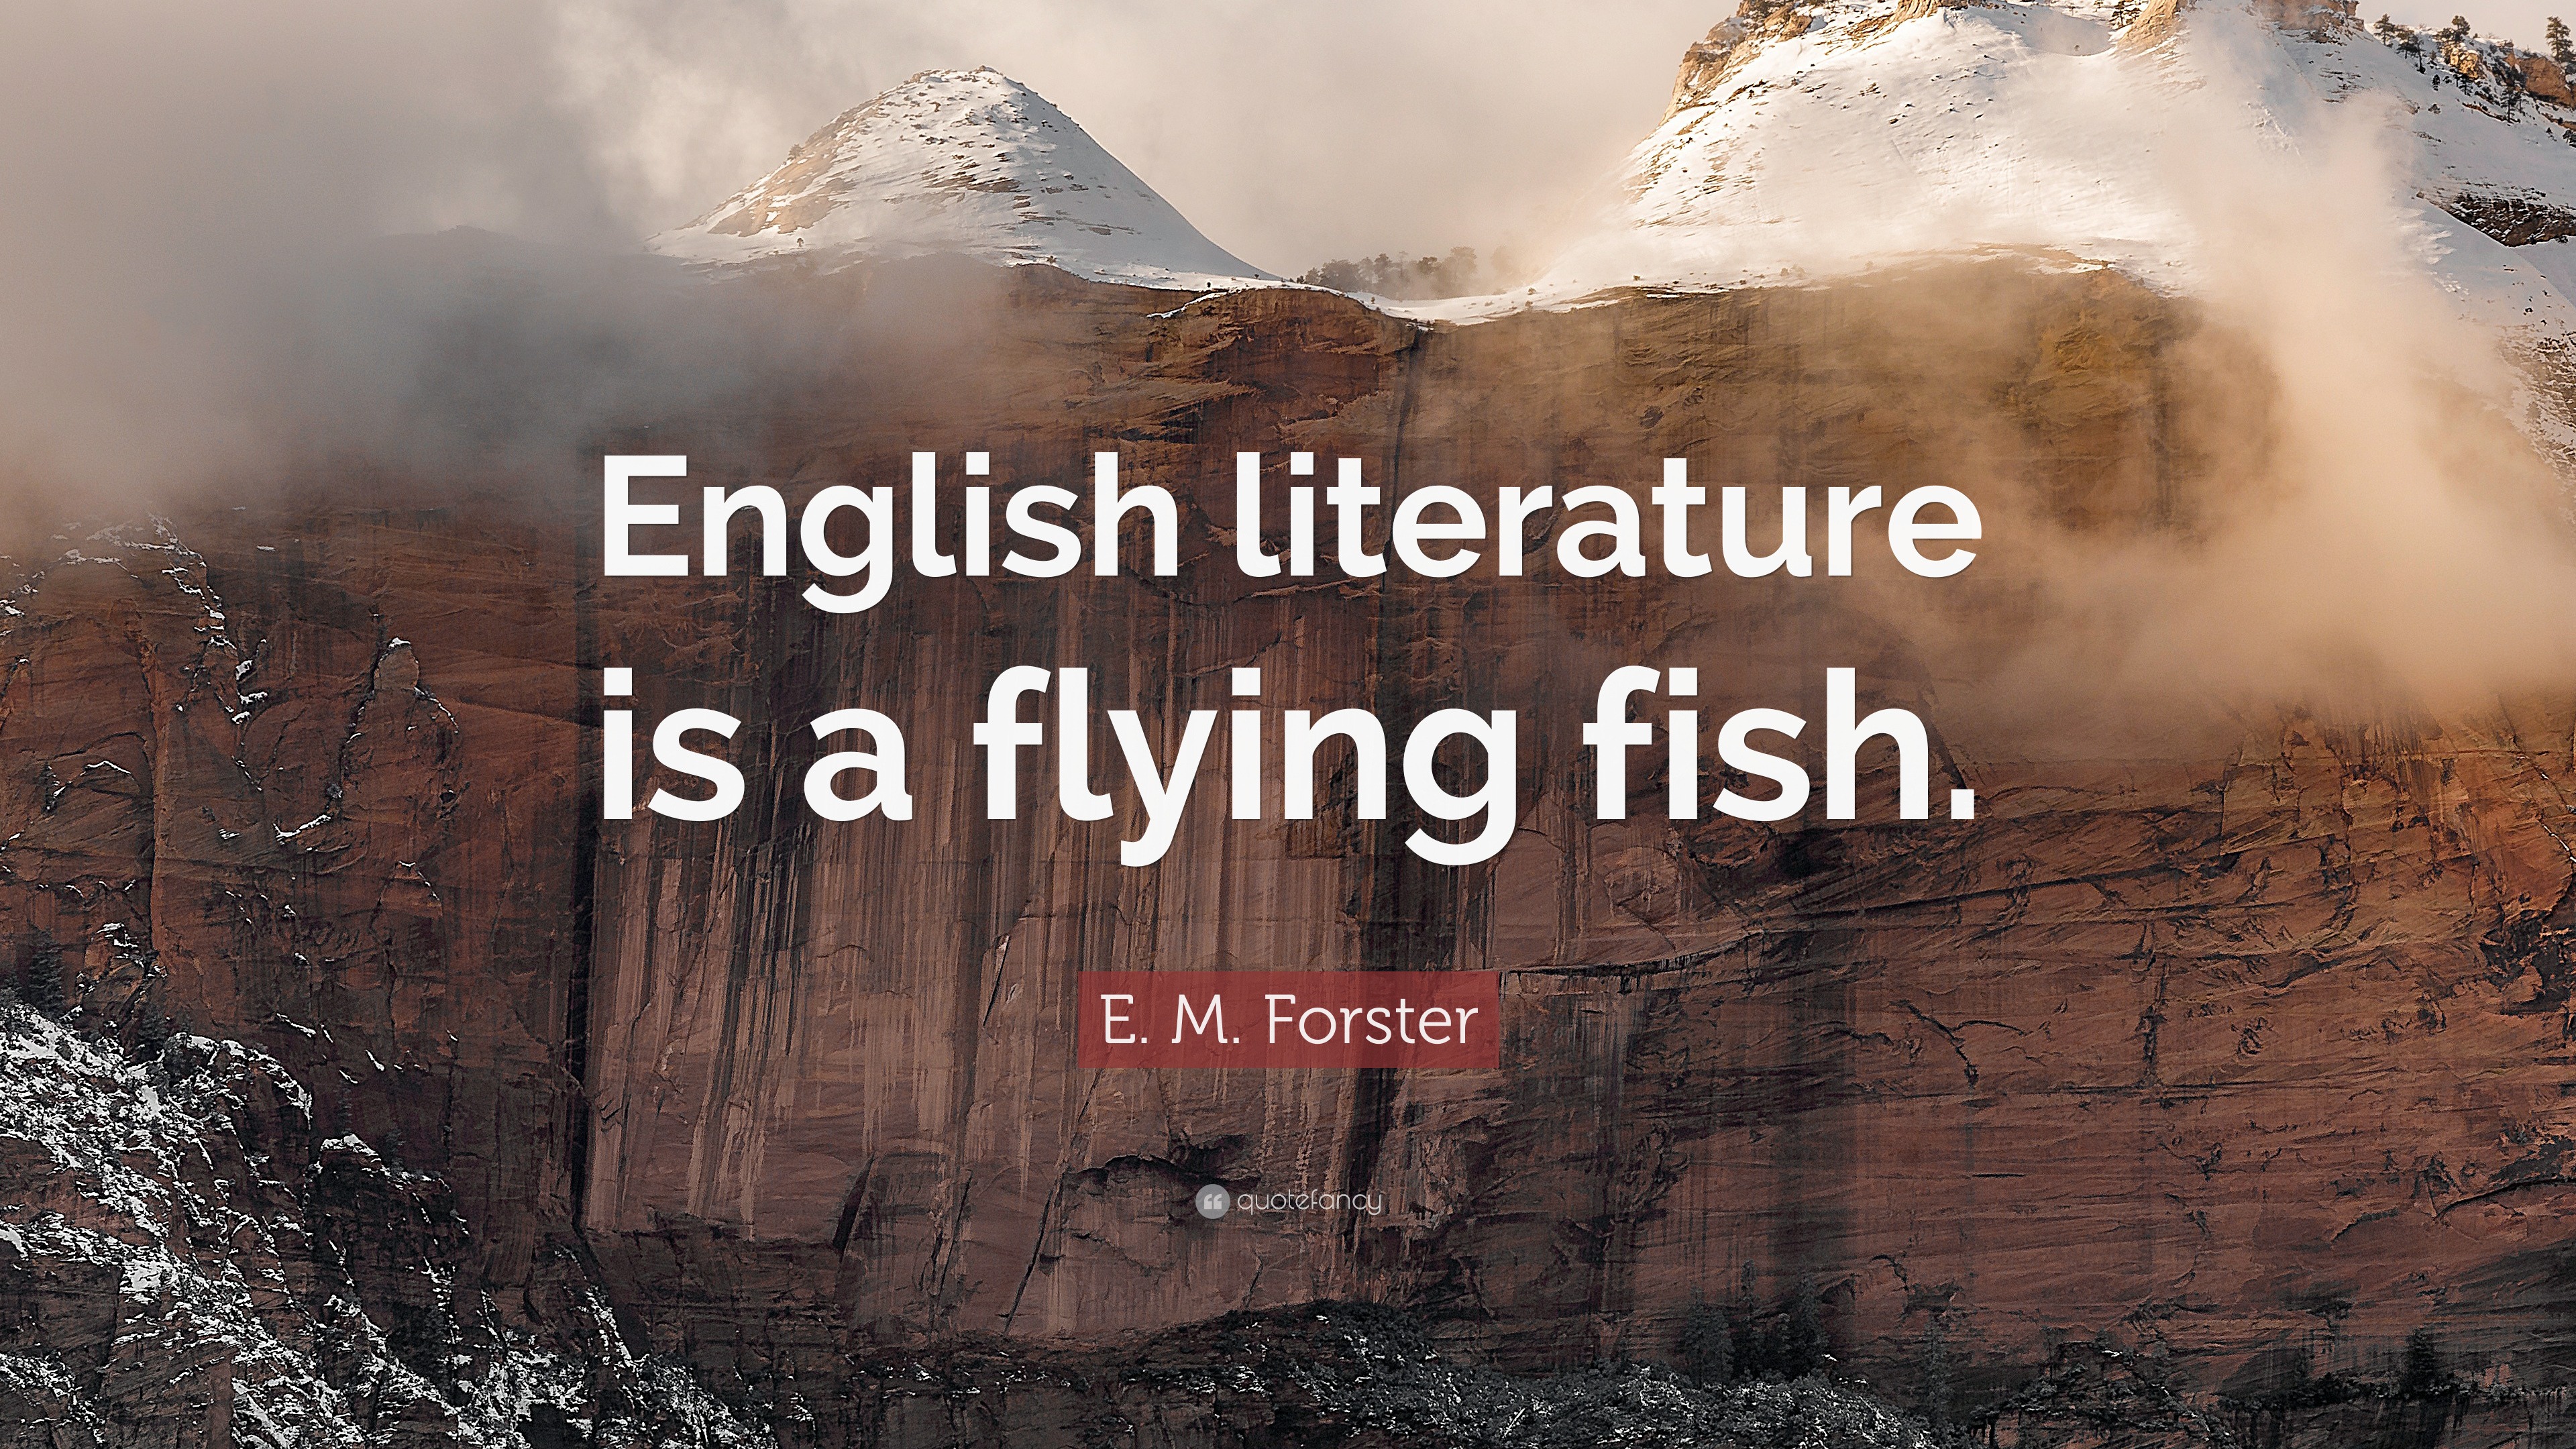 E. M. Forster Quote: “English literature is a flying fish.”